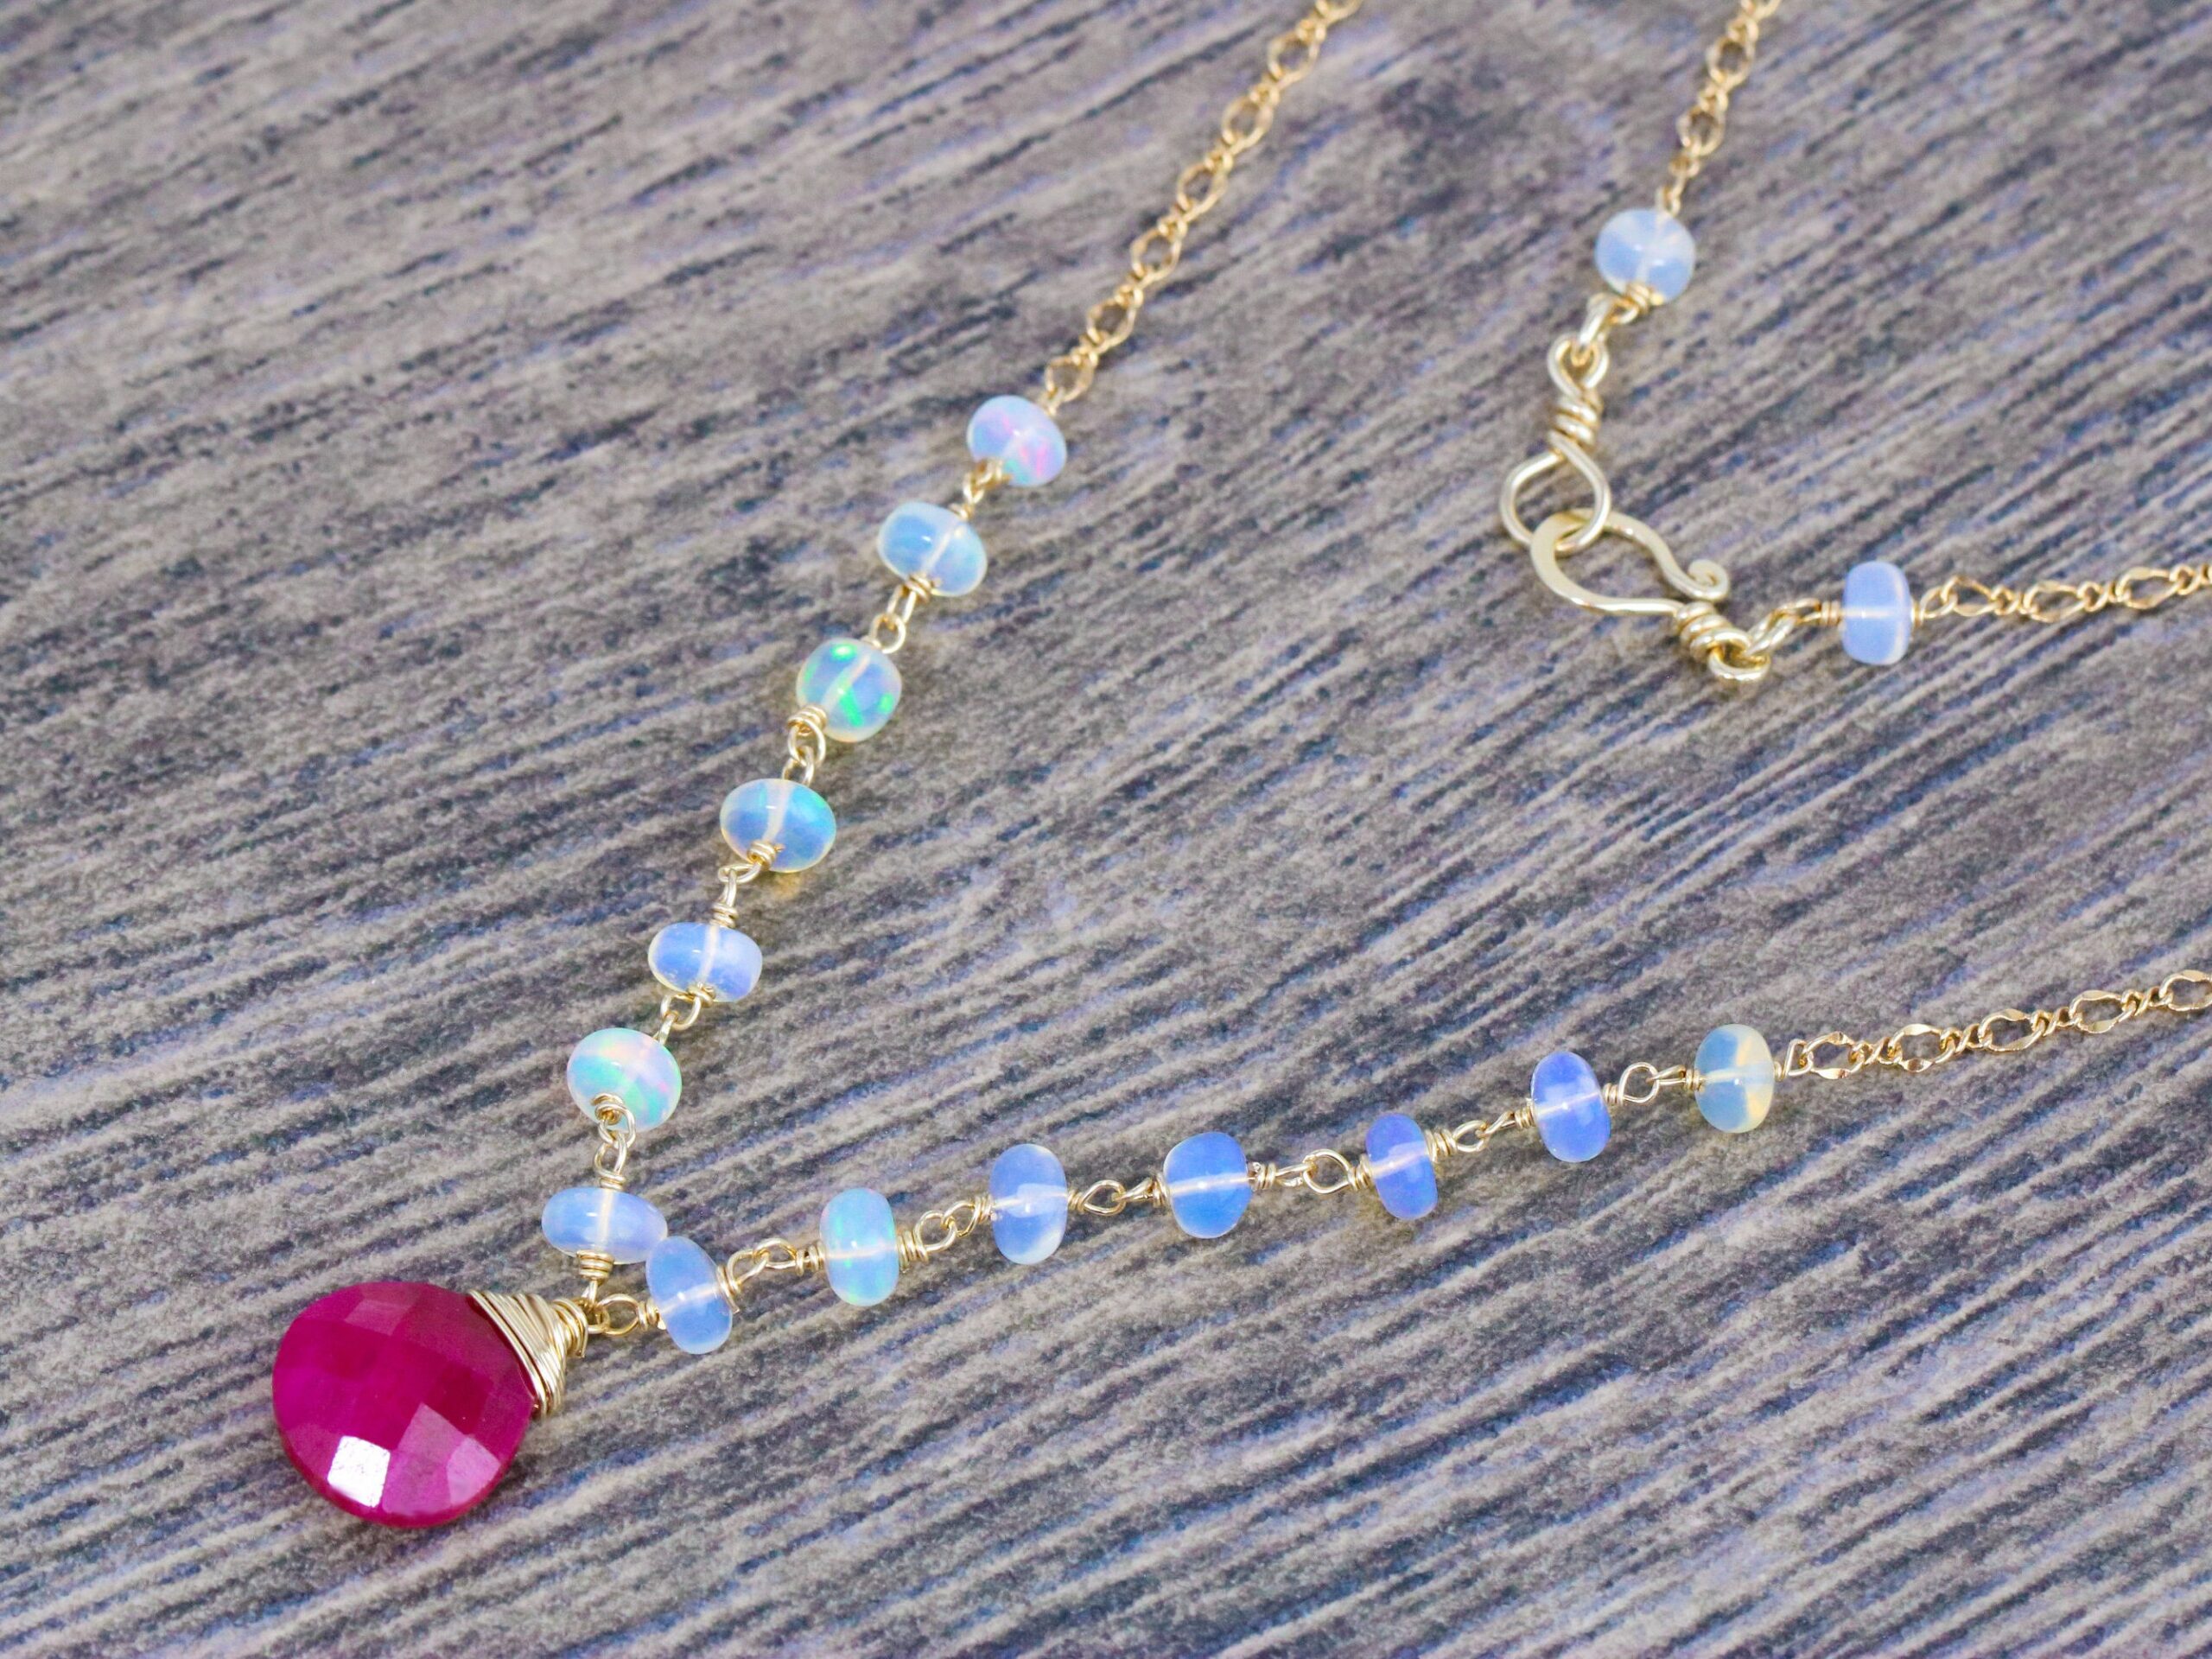 Solid Gold 14K Red Ruby with Ethiopian Opal Necklace